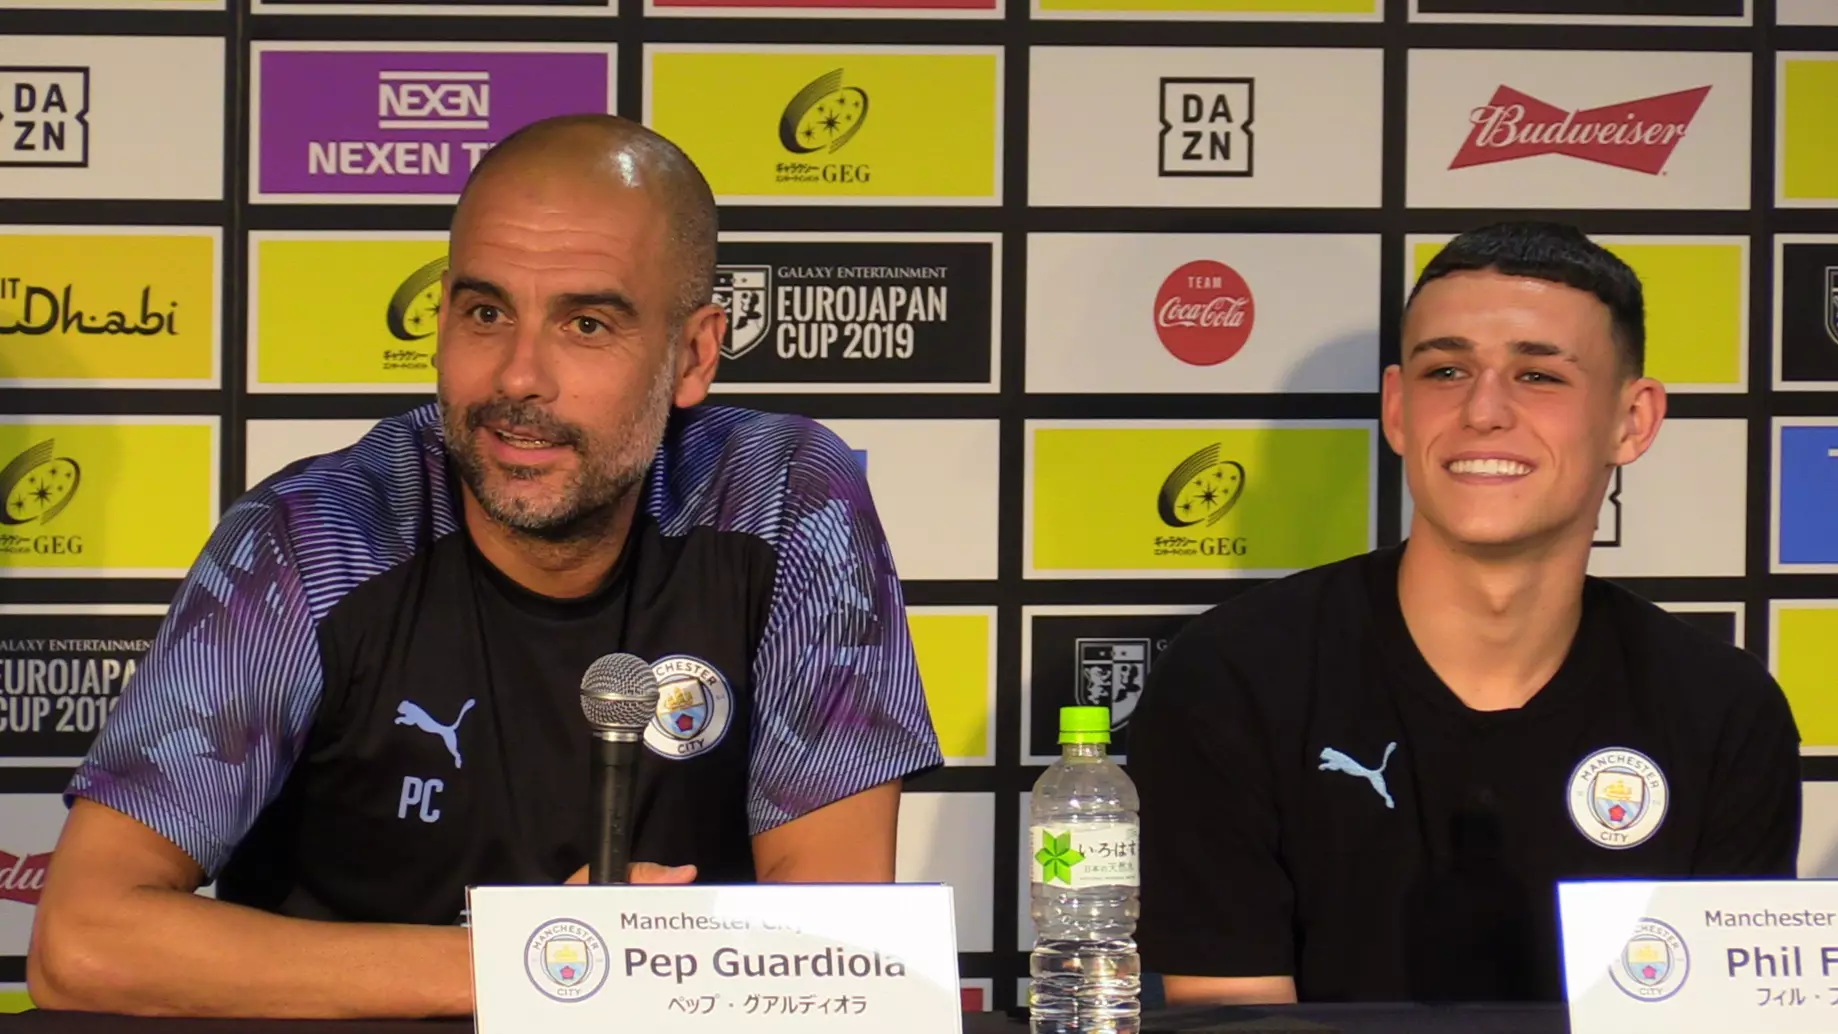 Pep Guardiola Claims Phil Foden Will Never Be Sold - Not Even For €500 Million